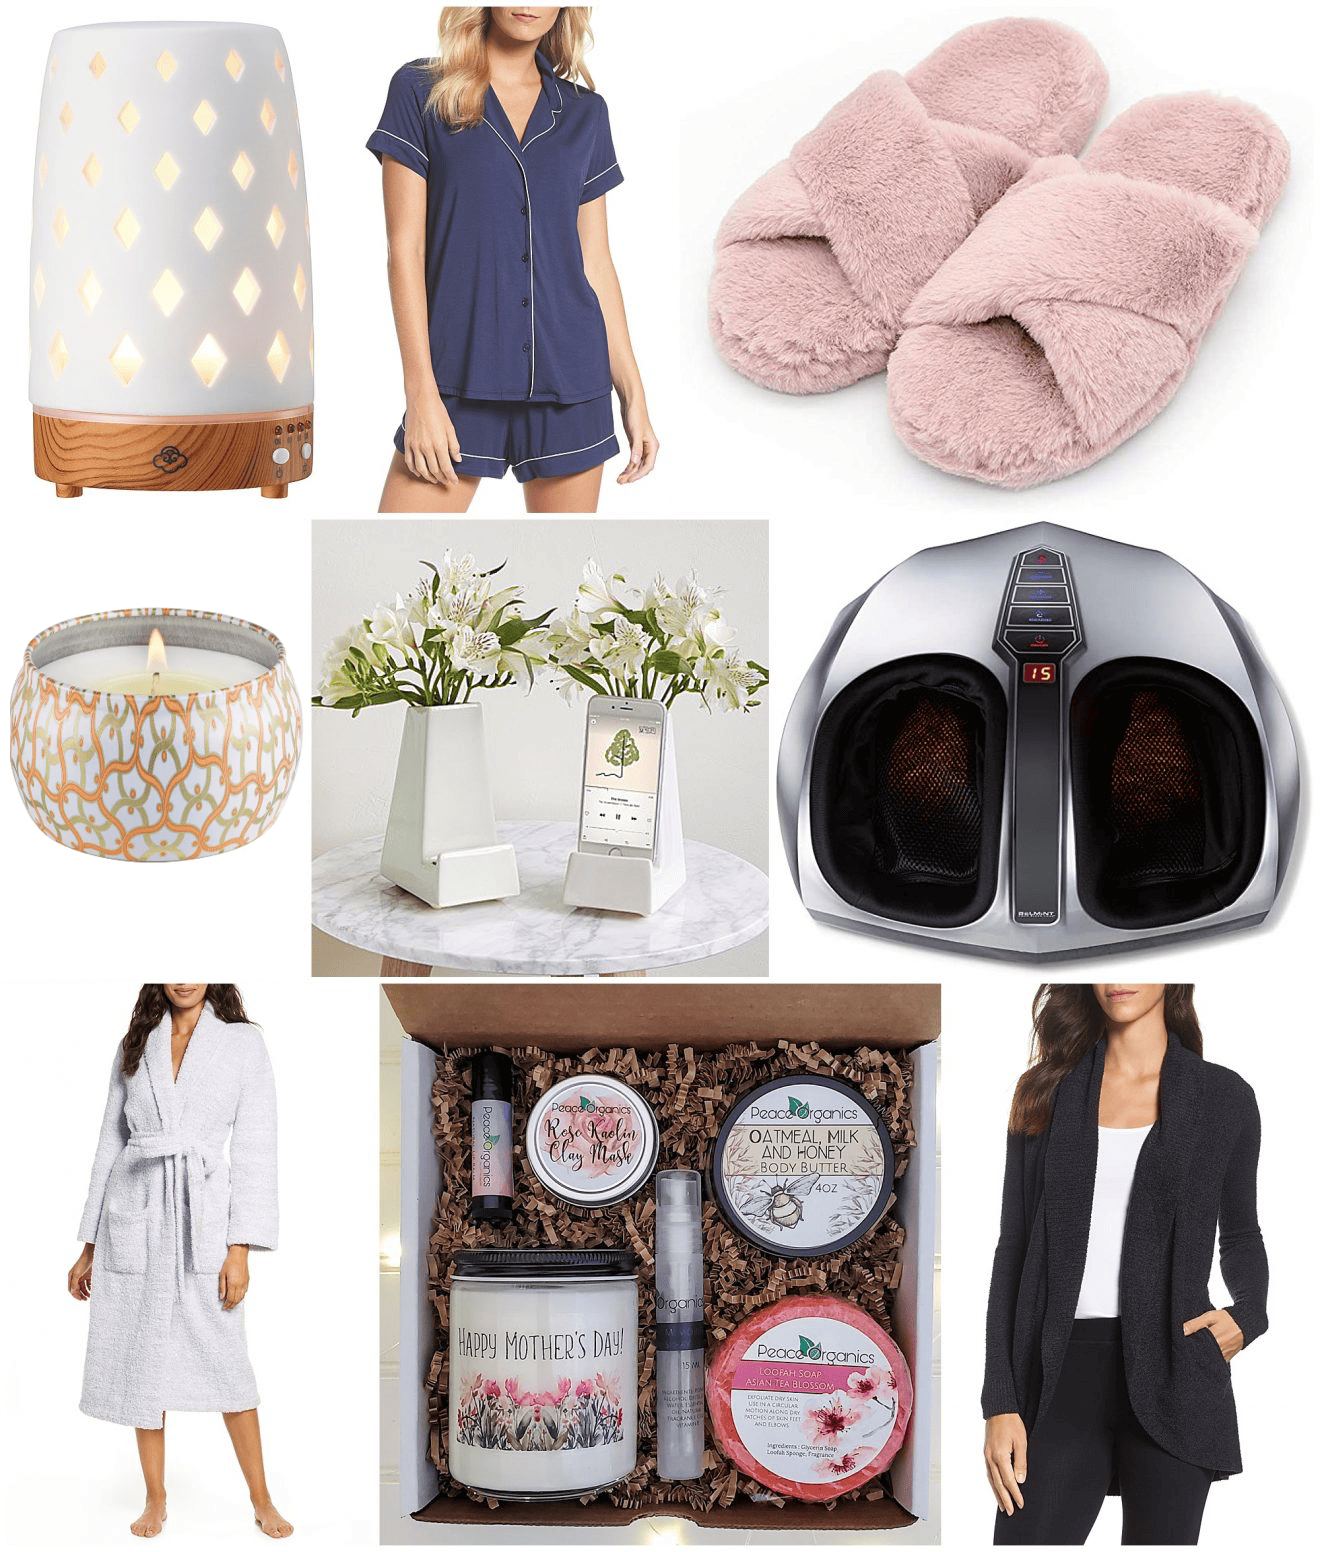 Gifts for the Homebody Mom